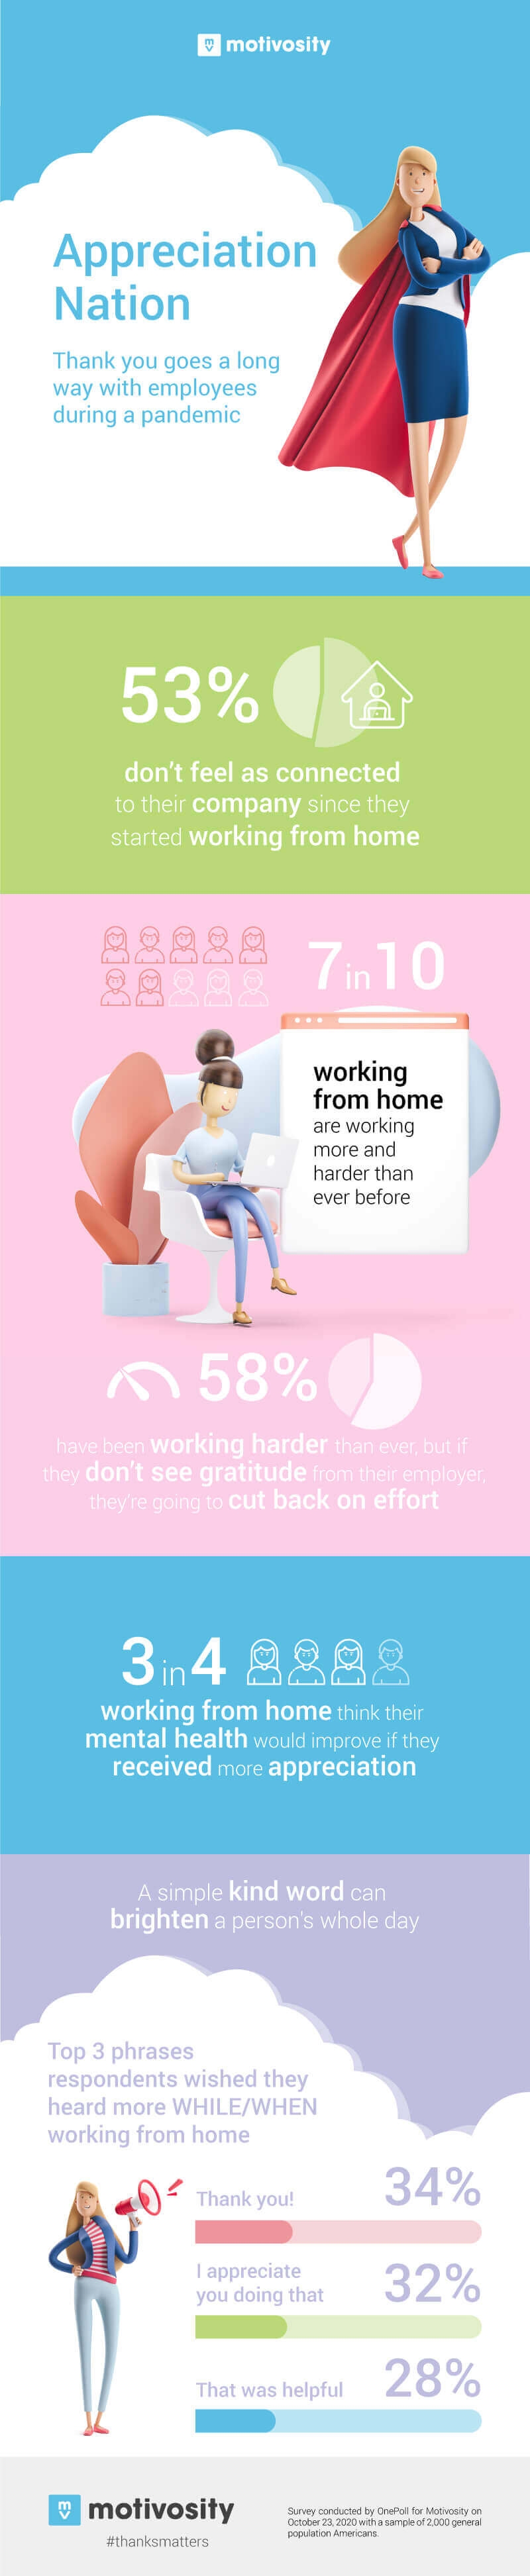 Infographic of the results of the 2,000 person study about their experiences working from home.